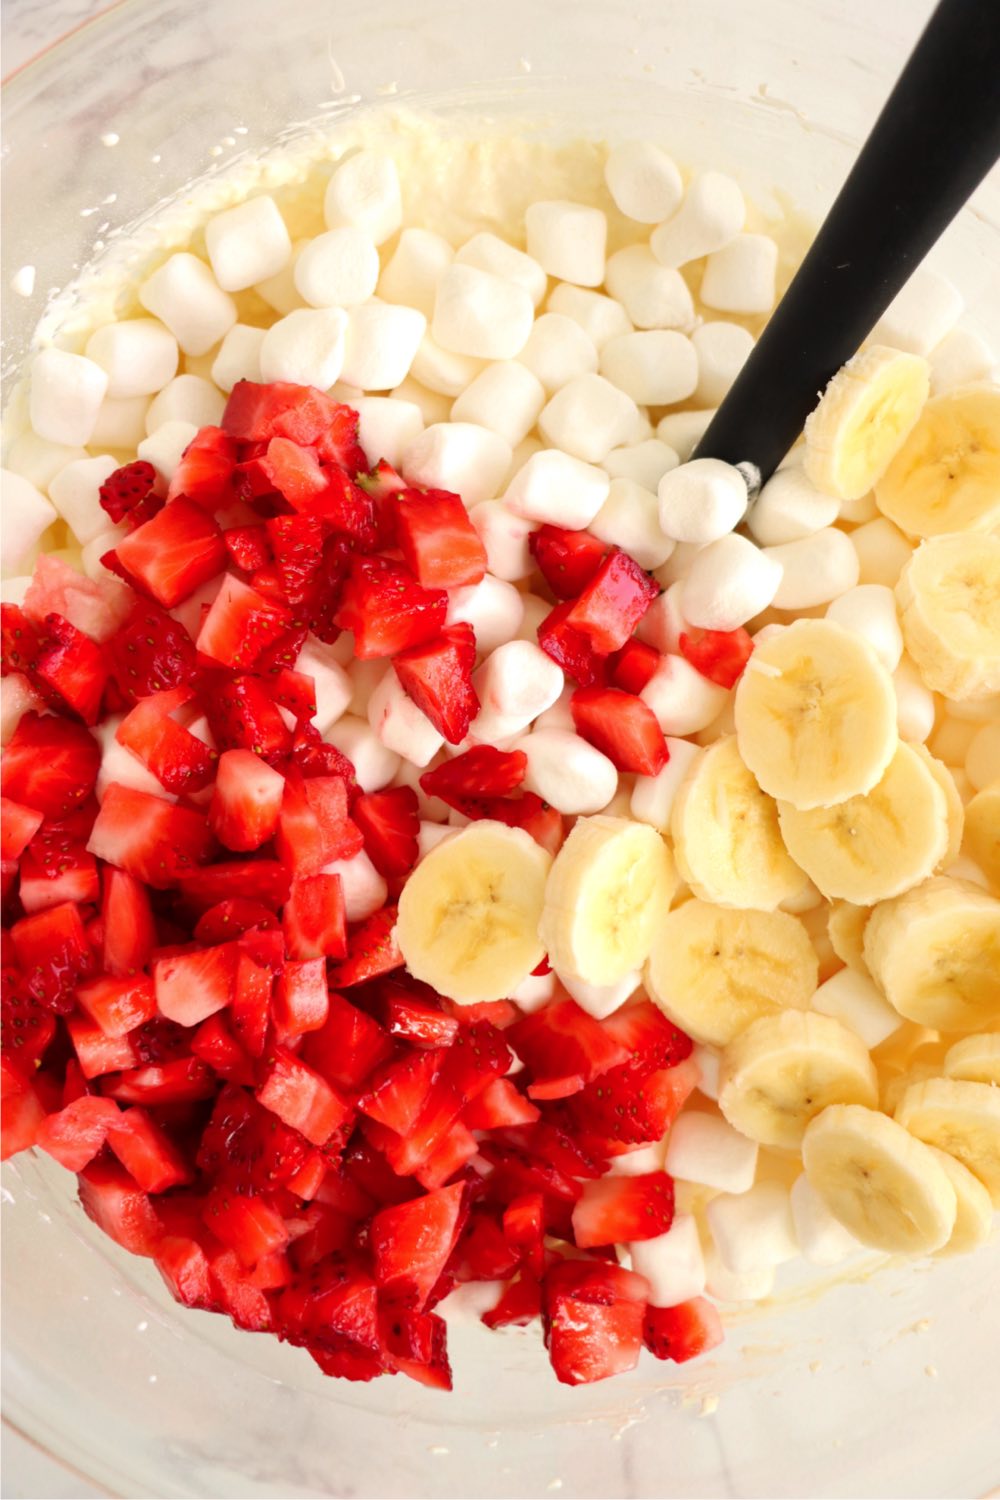 Bowl filled with diced strawberries, sliced bananas and marshmallows.